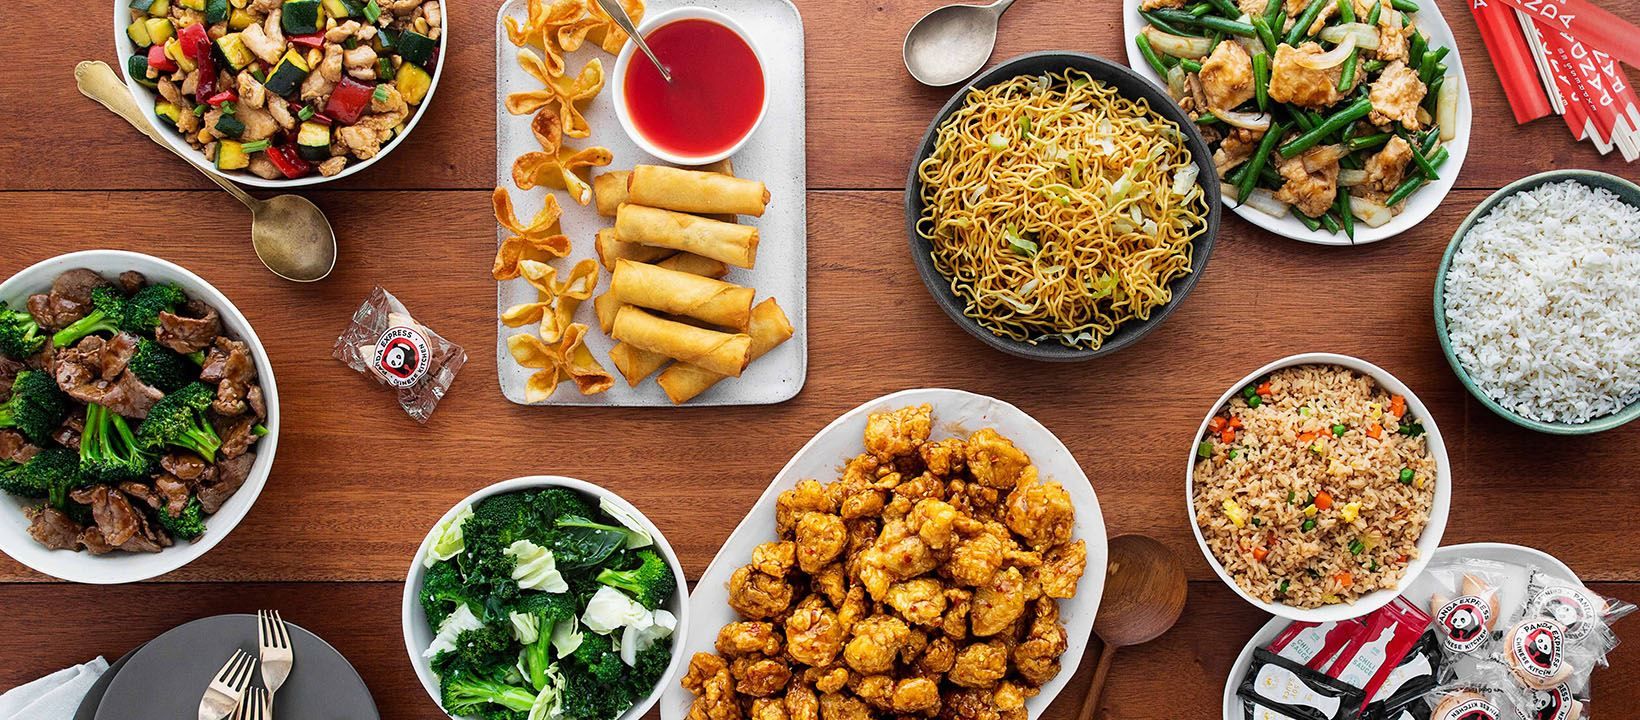 Panda Express Is Limiting Its Menu To Best-Selling Items Only